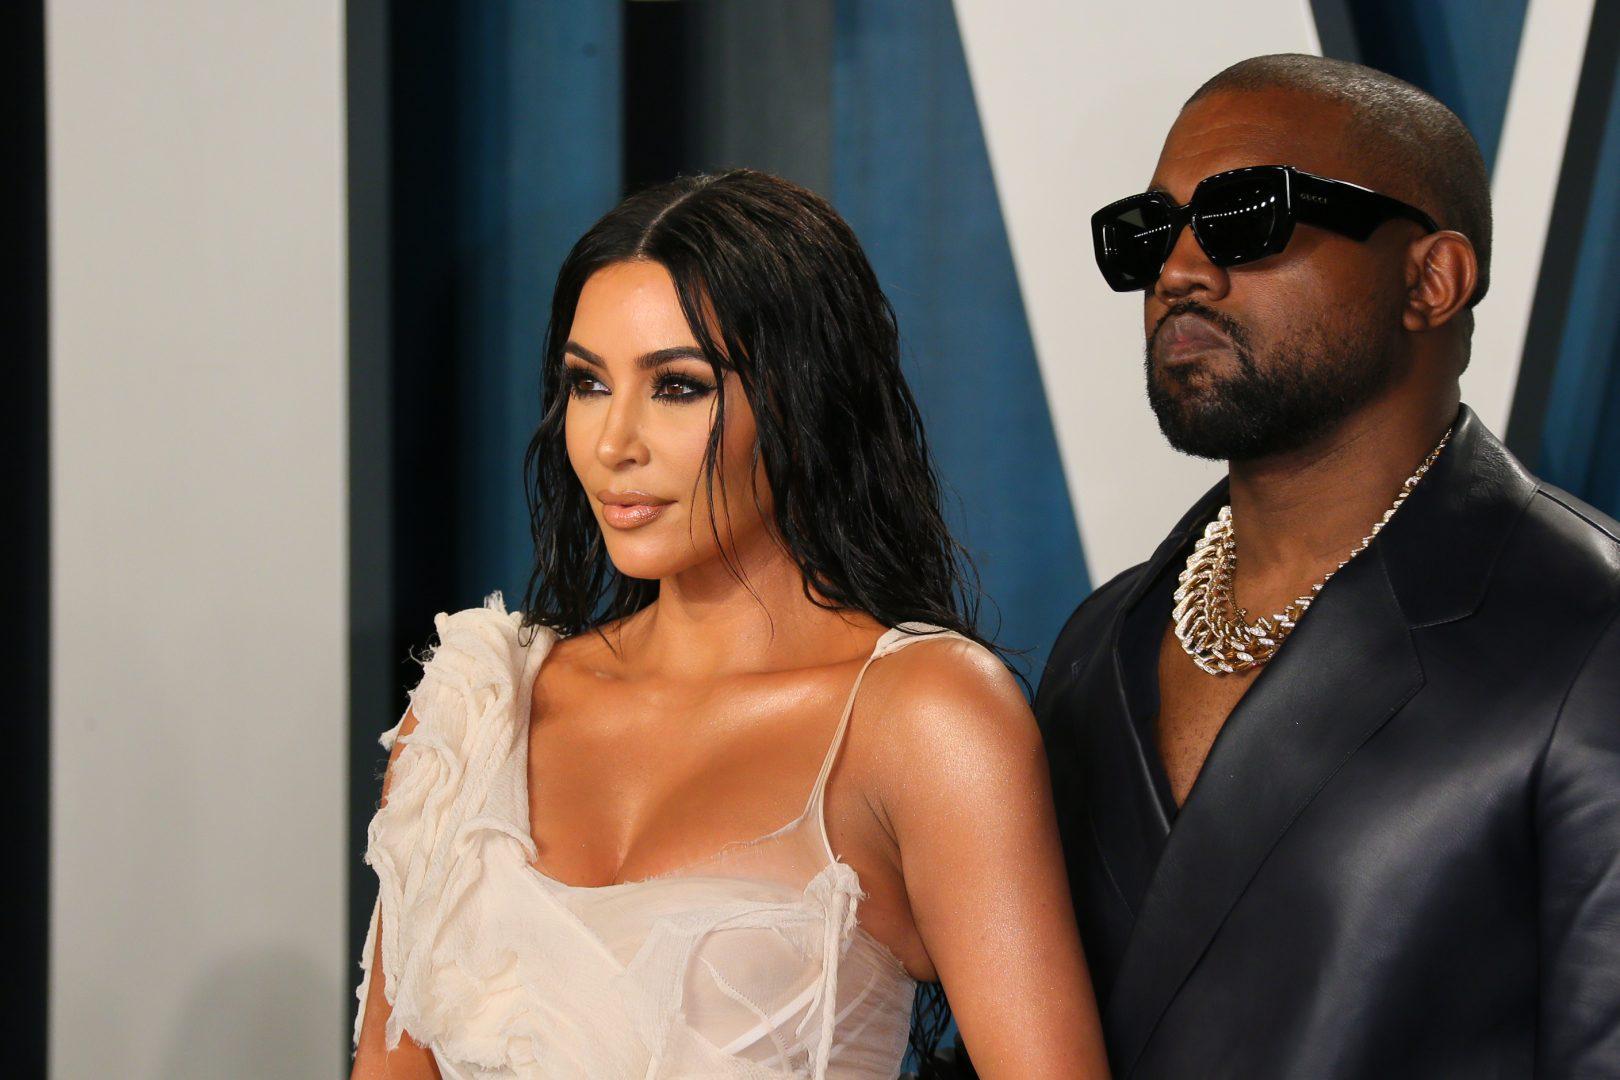 Kim Kardashian, left, and husband Kanye West attend the 2020 Vanity Fair Oscar Party following the 92nd Oscars at The Wallis Annenberg Center for the Performing Arts in Beverly Hills, California, on Feb. 9, 2020. (Jean-Baptiste Lacroix/AFP via Getty Images)